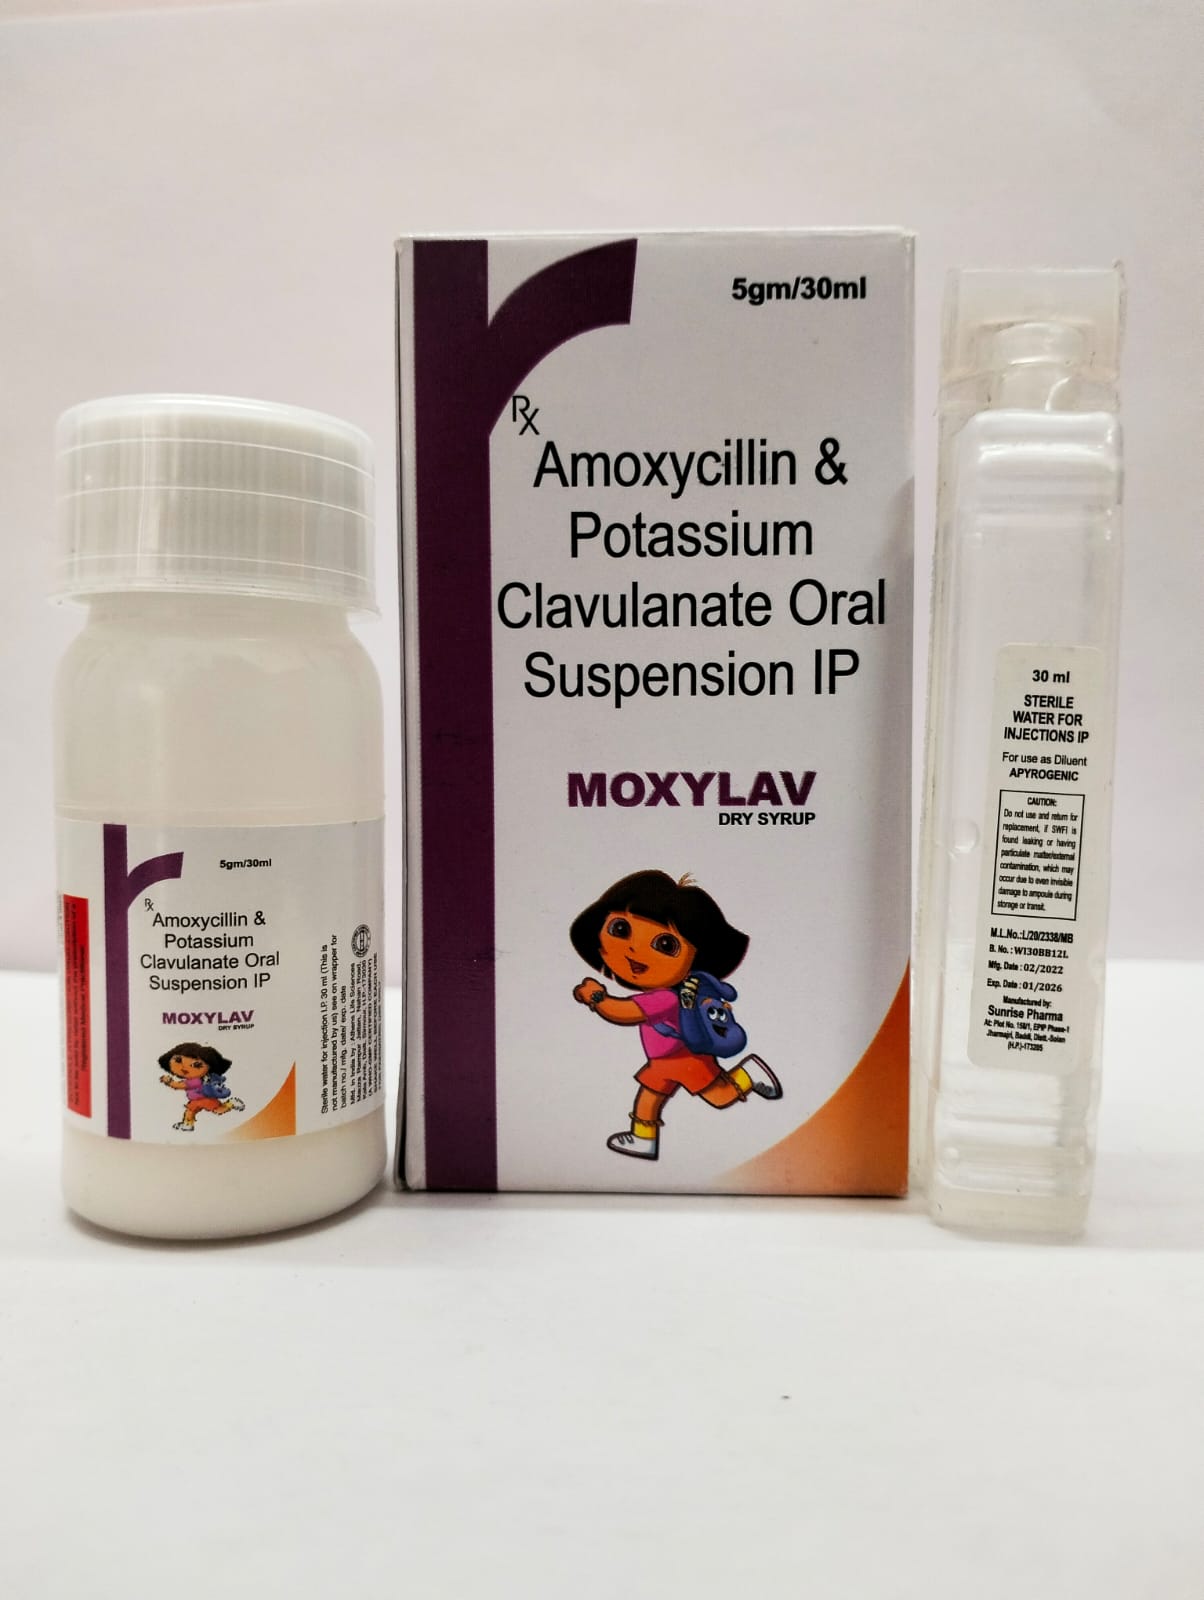 amoxycillin 200mg + clavulanic acid 28.5 mg oral suspension with water